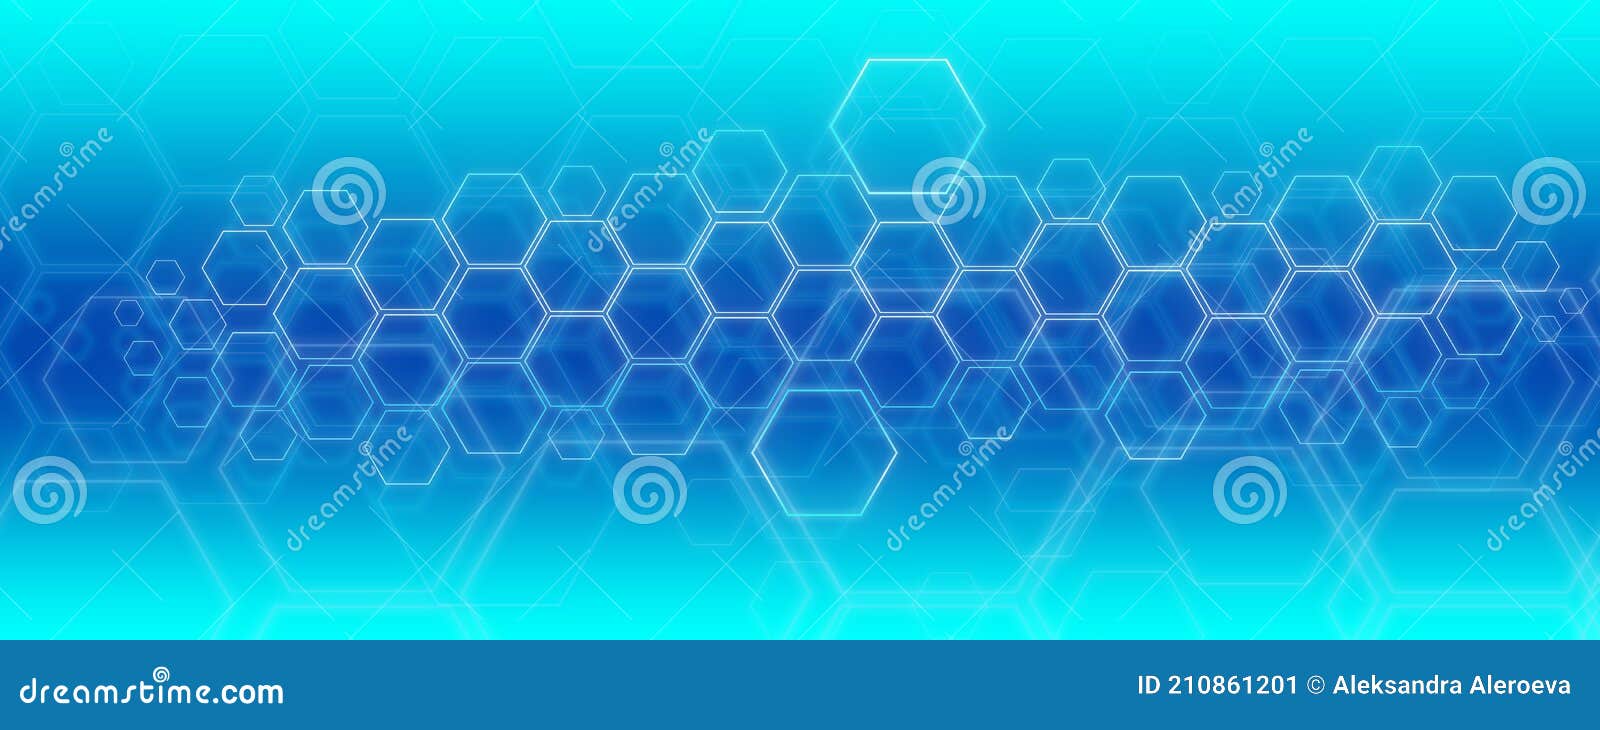 geometric abstract background with hexagons. molecule structure and bond. science, technology